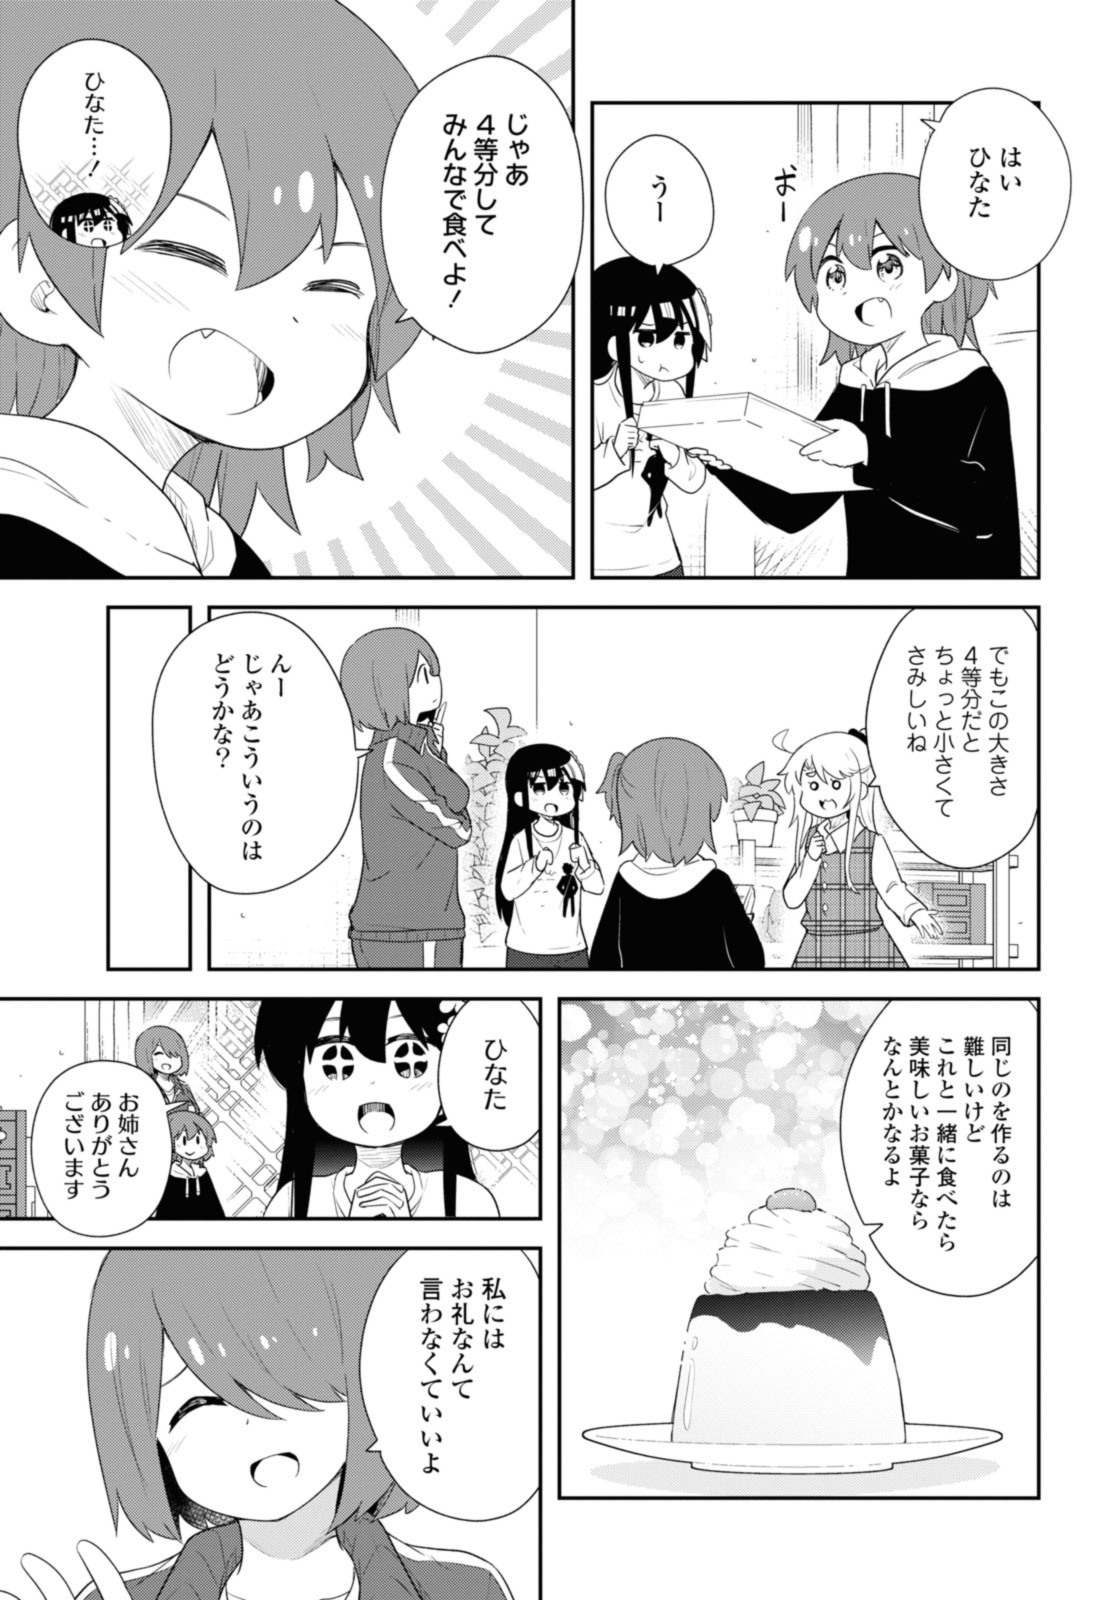 Wataten! An Angel Flew Down to Me 私に天使が舞い降りた！ 第109話 - Page 15